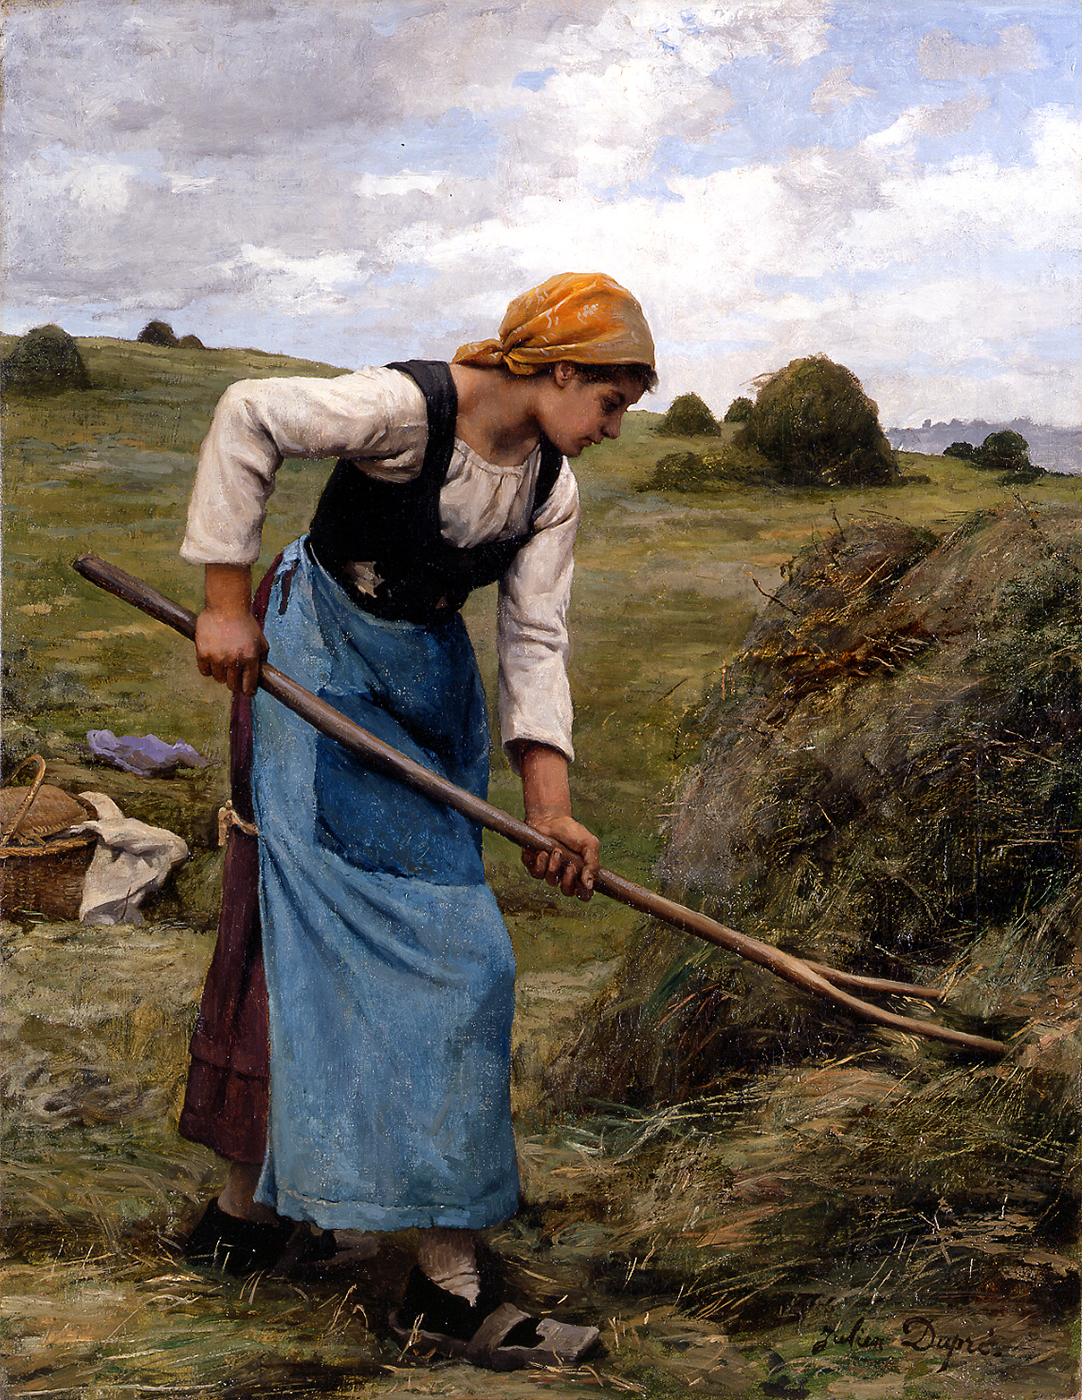 a women with a pitchfork in the field - The Harvester - Julien Dupre